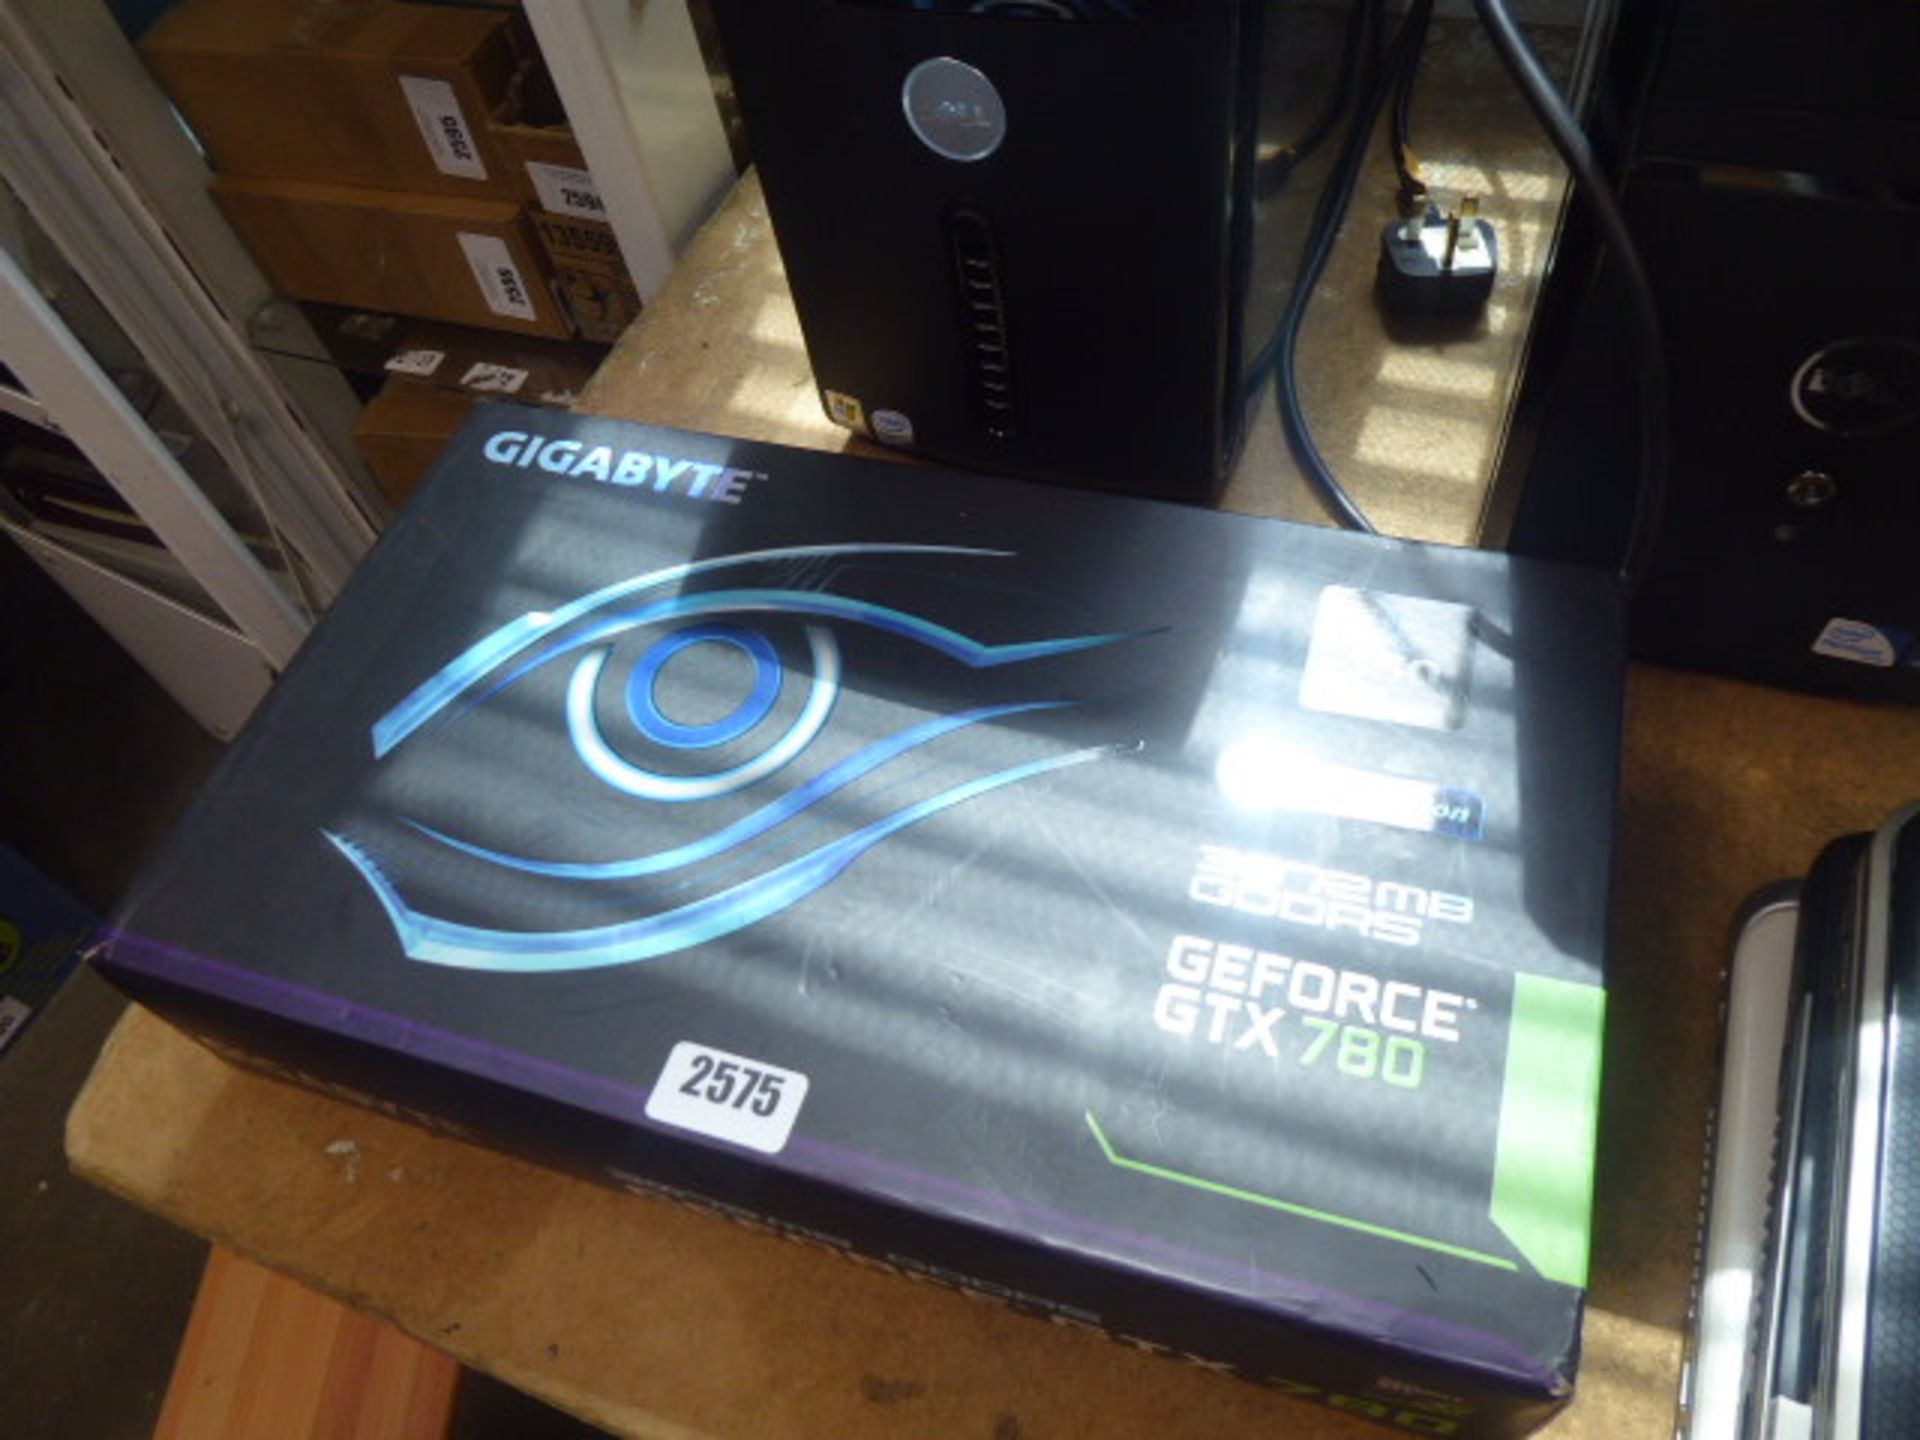 Gigabyte G Force GTX 780 graphics card with box